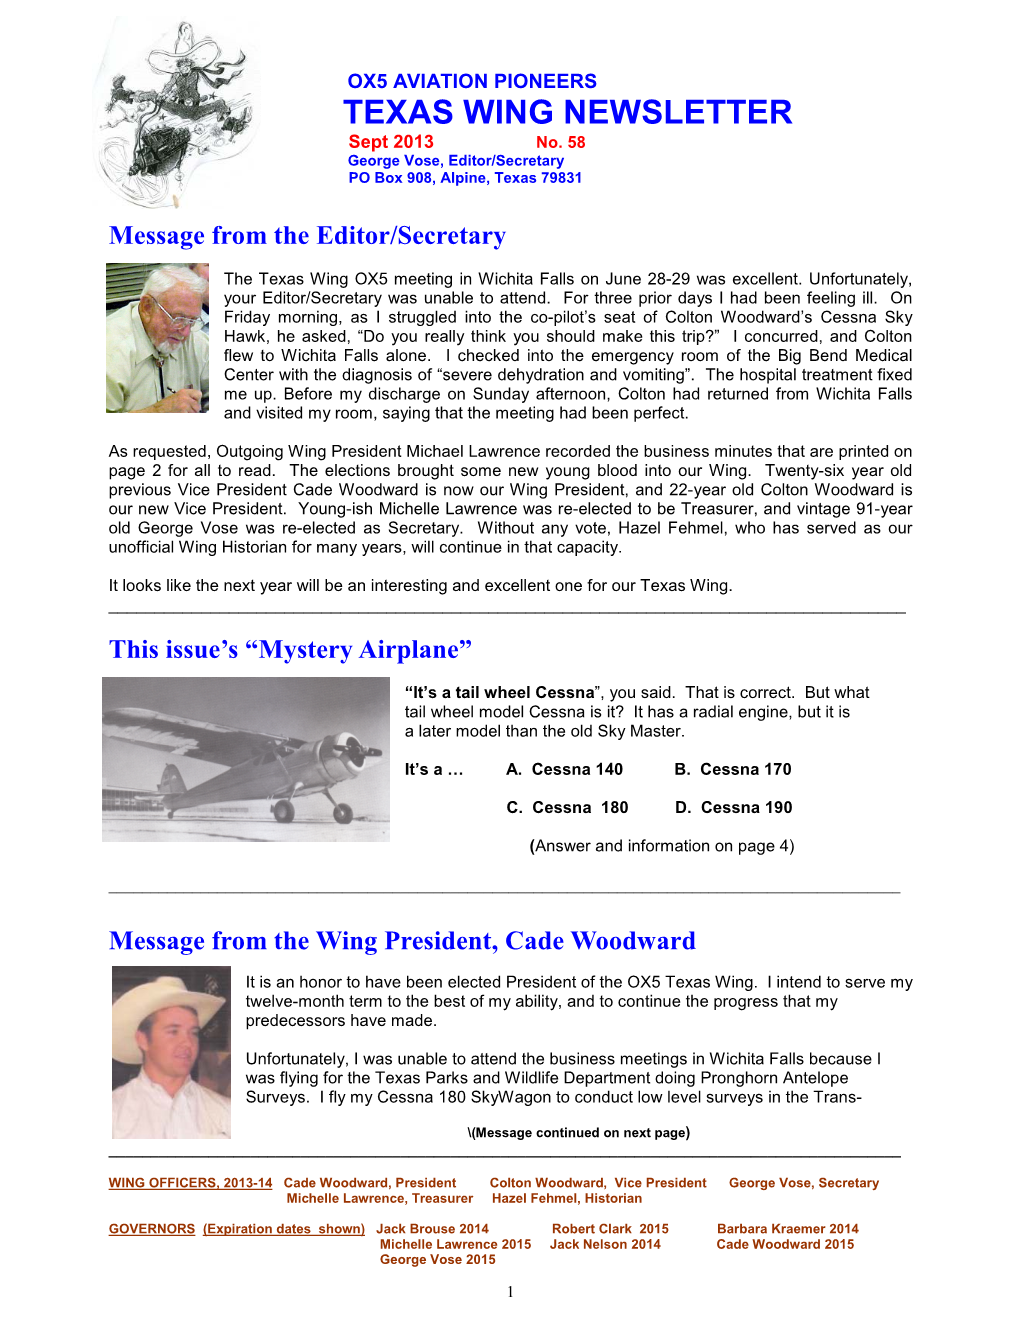 TEXAS WING NEWSLETTER Sept 2013 No